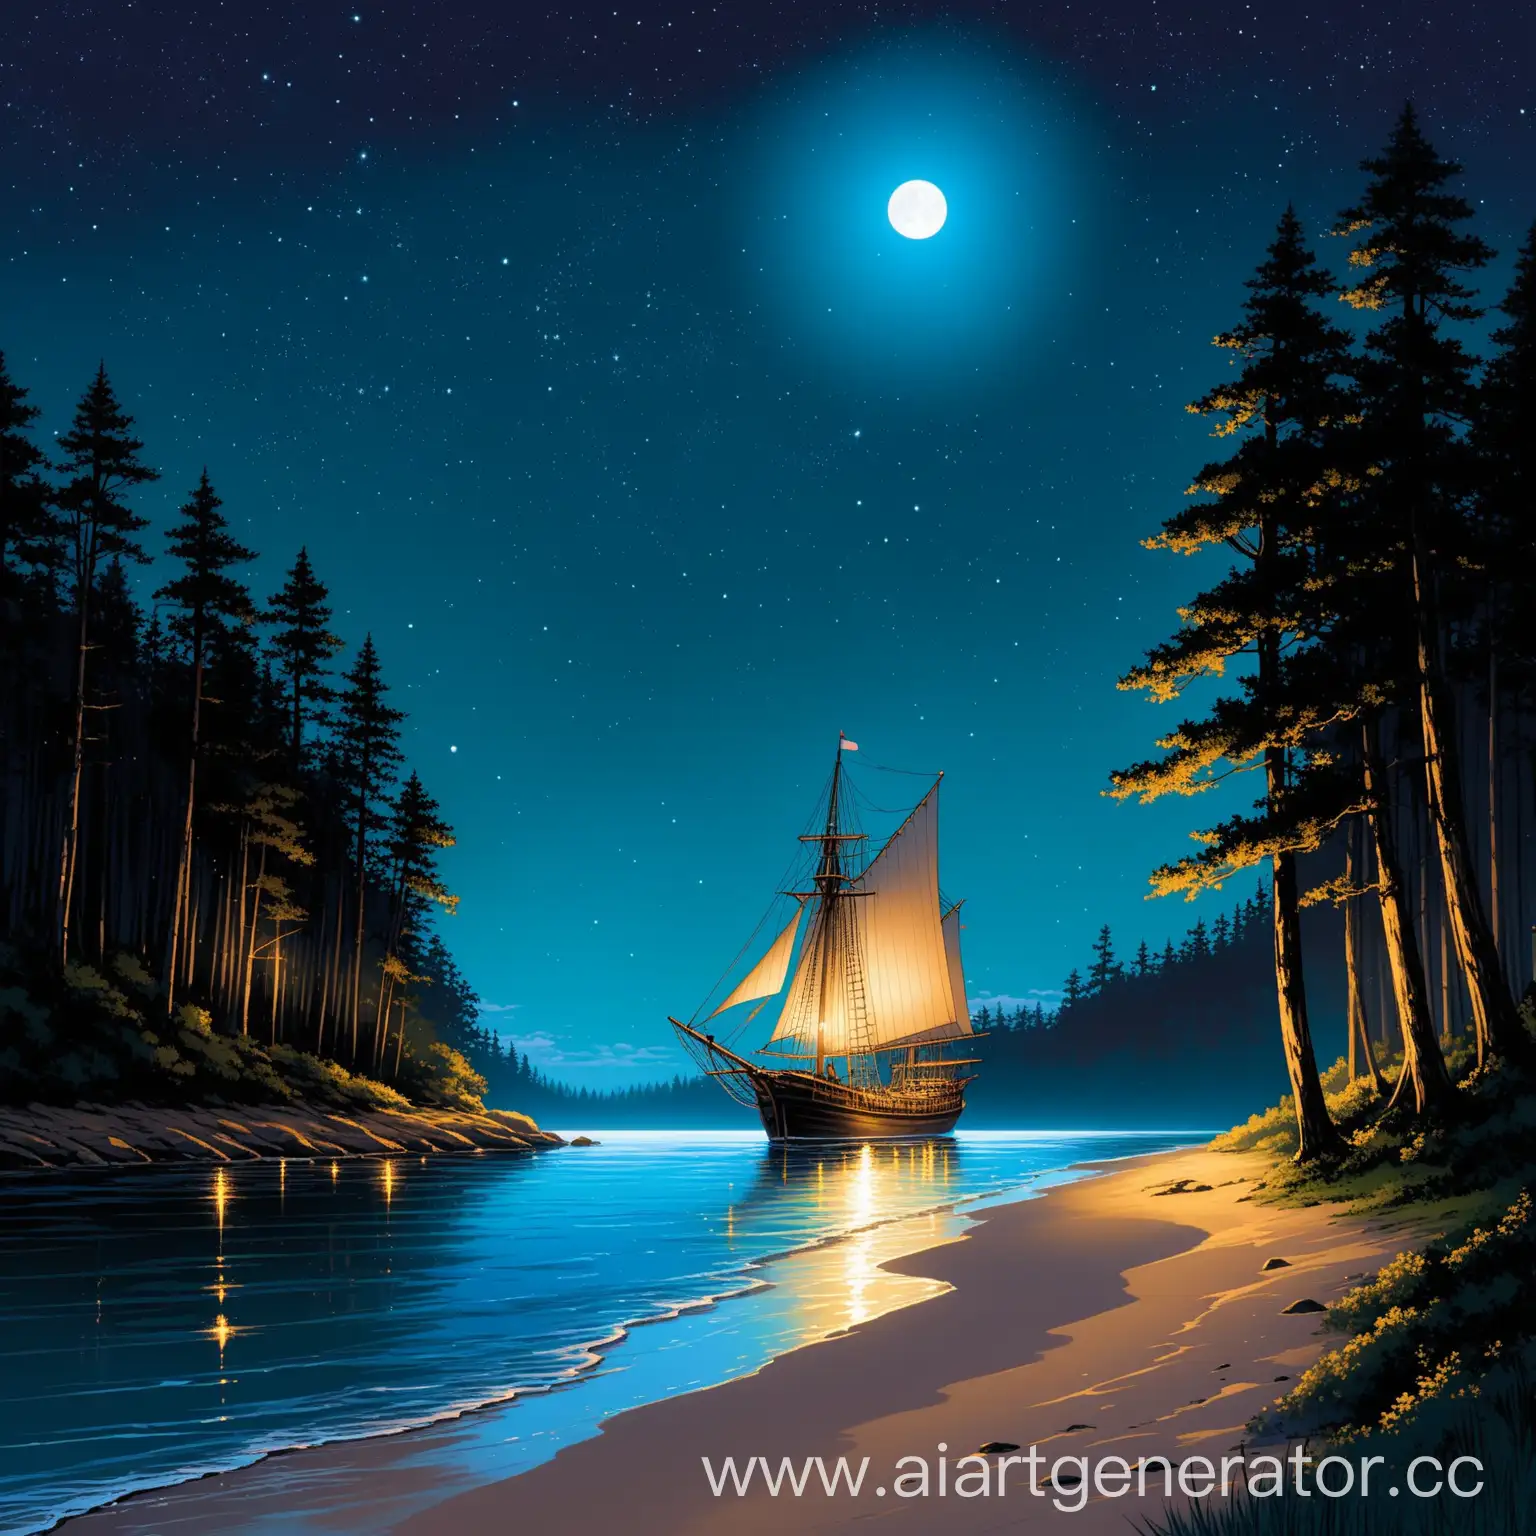 Schooner-Moored-to-Forest-Shore-at-Night